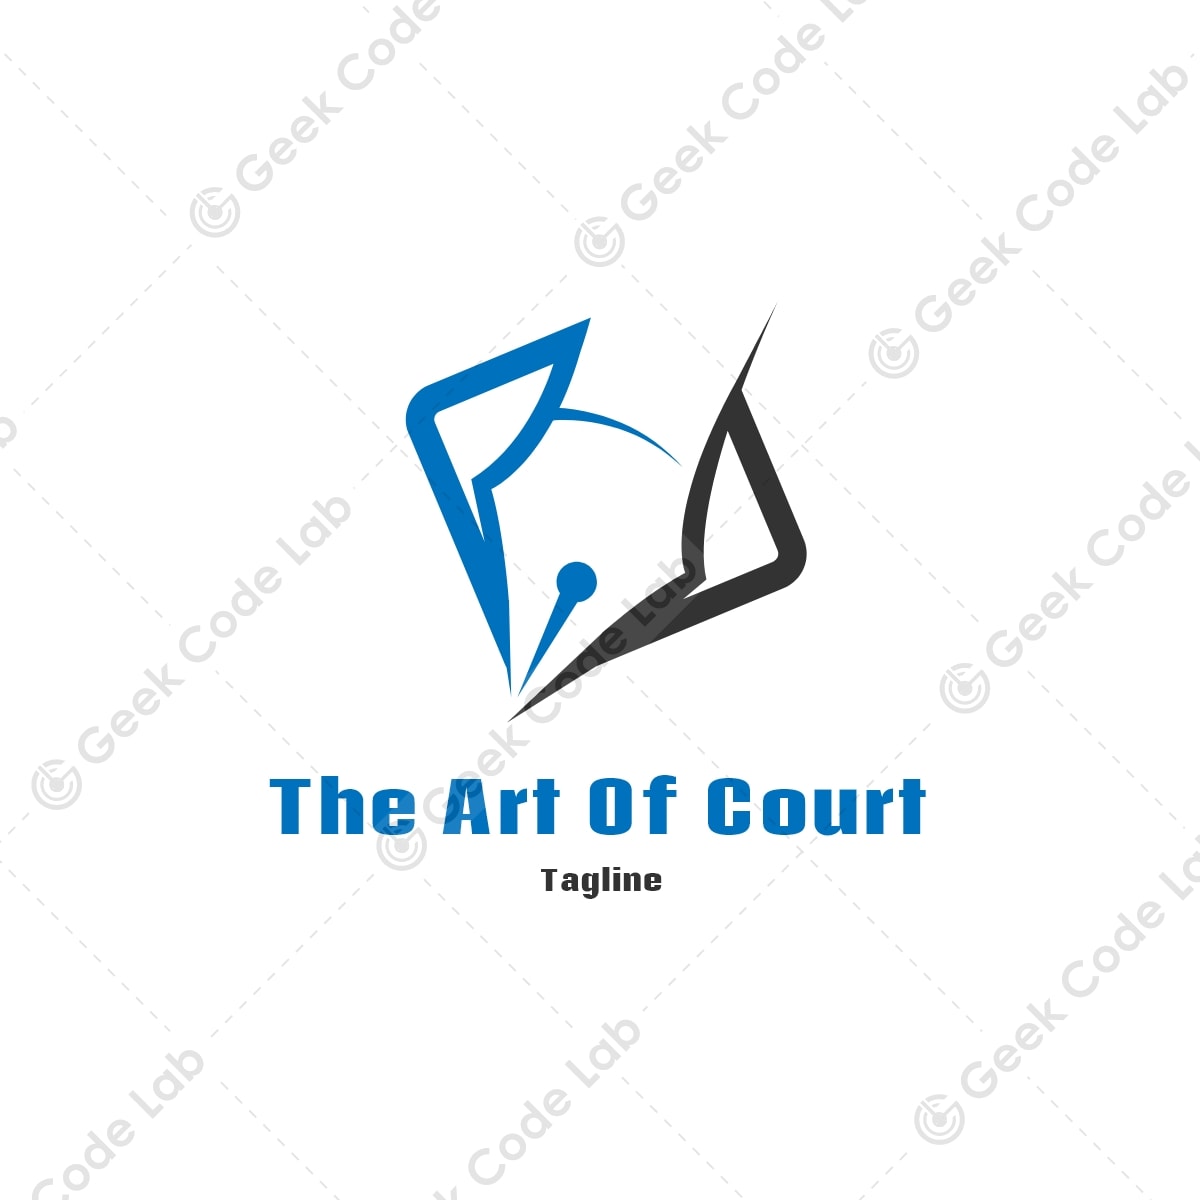 The Art Of Court